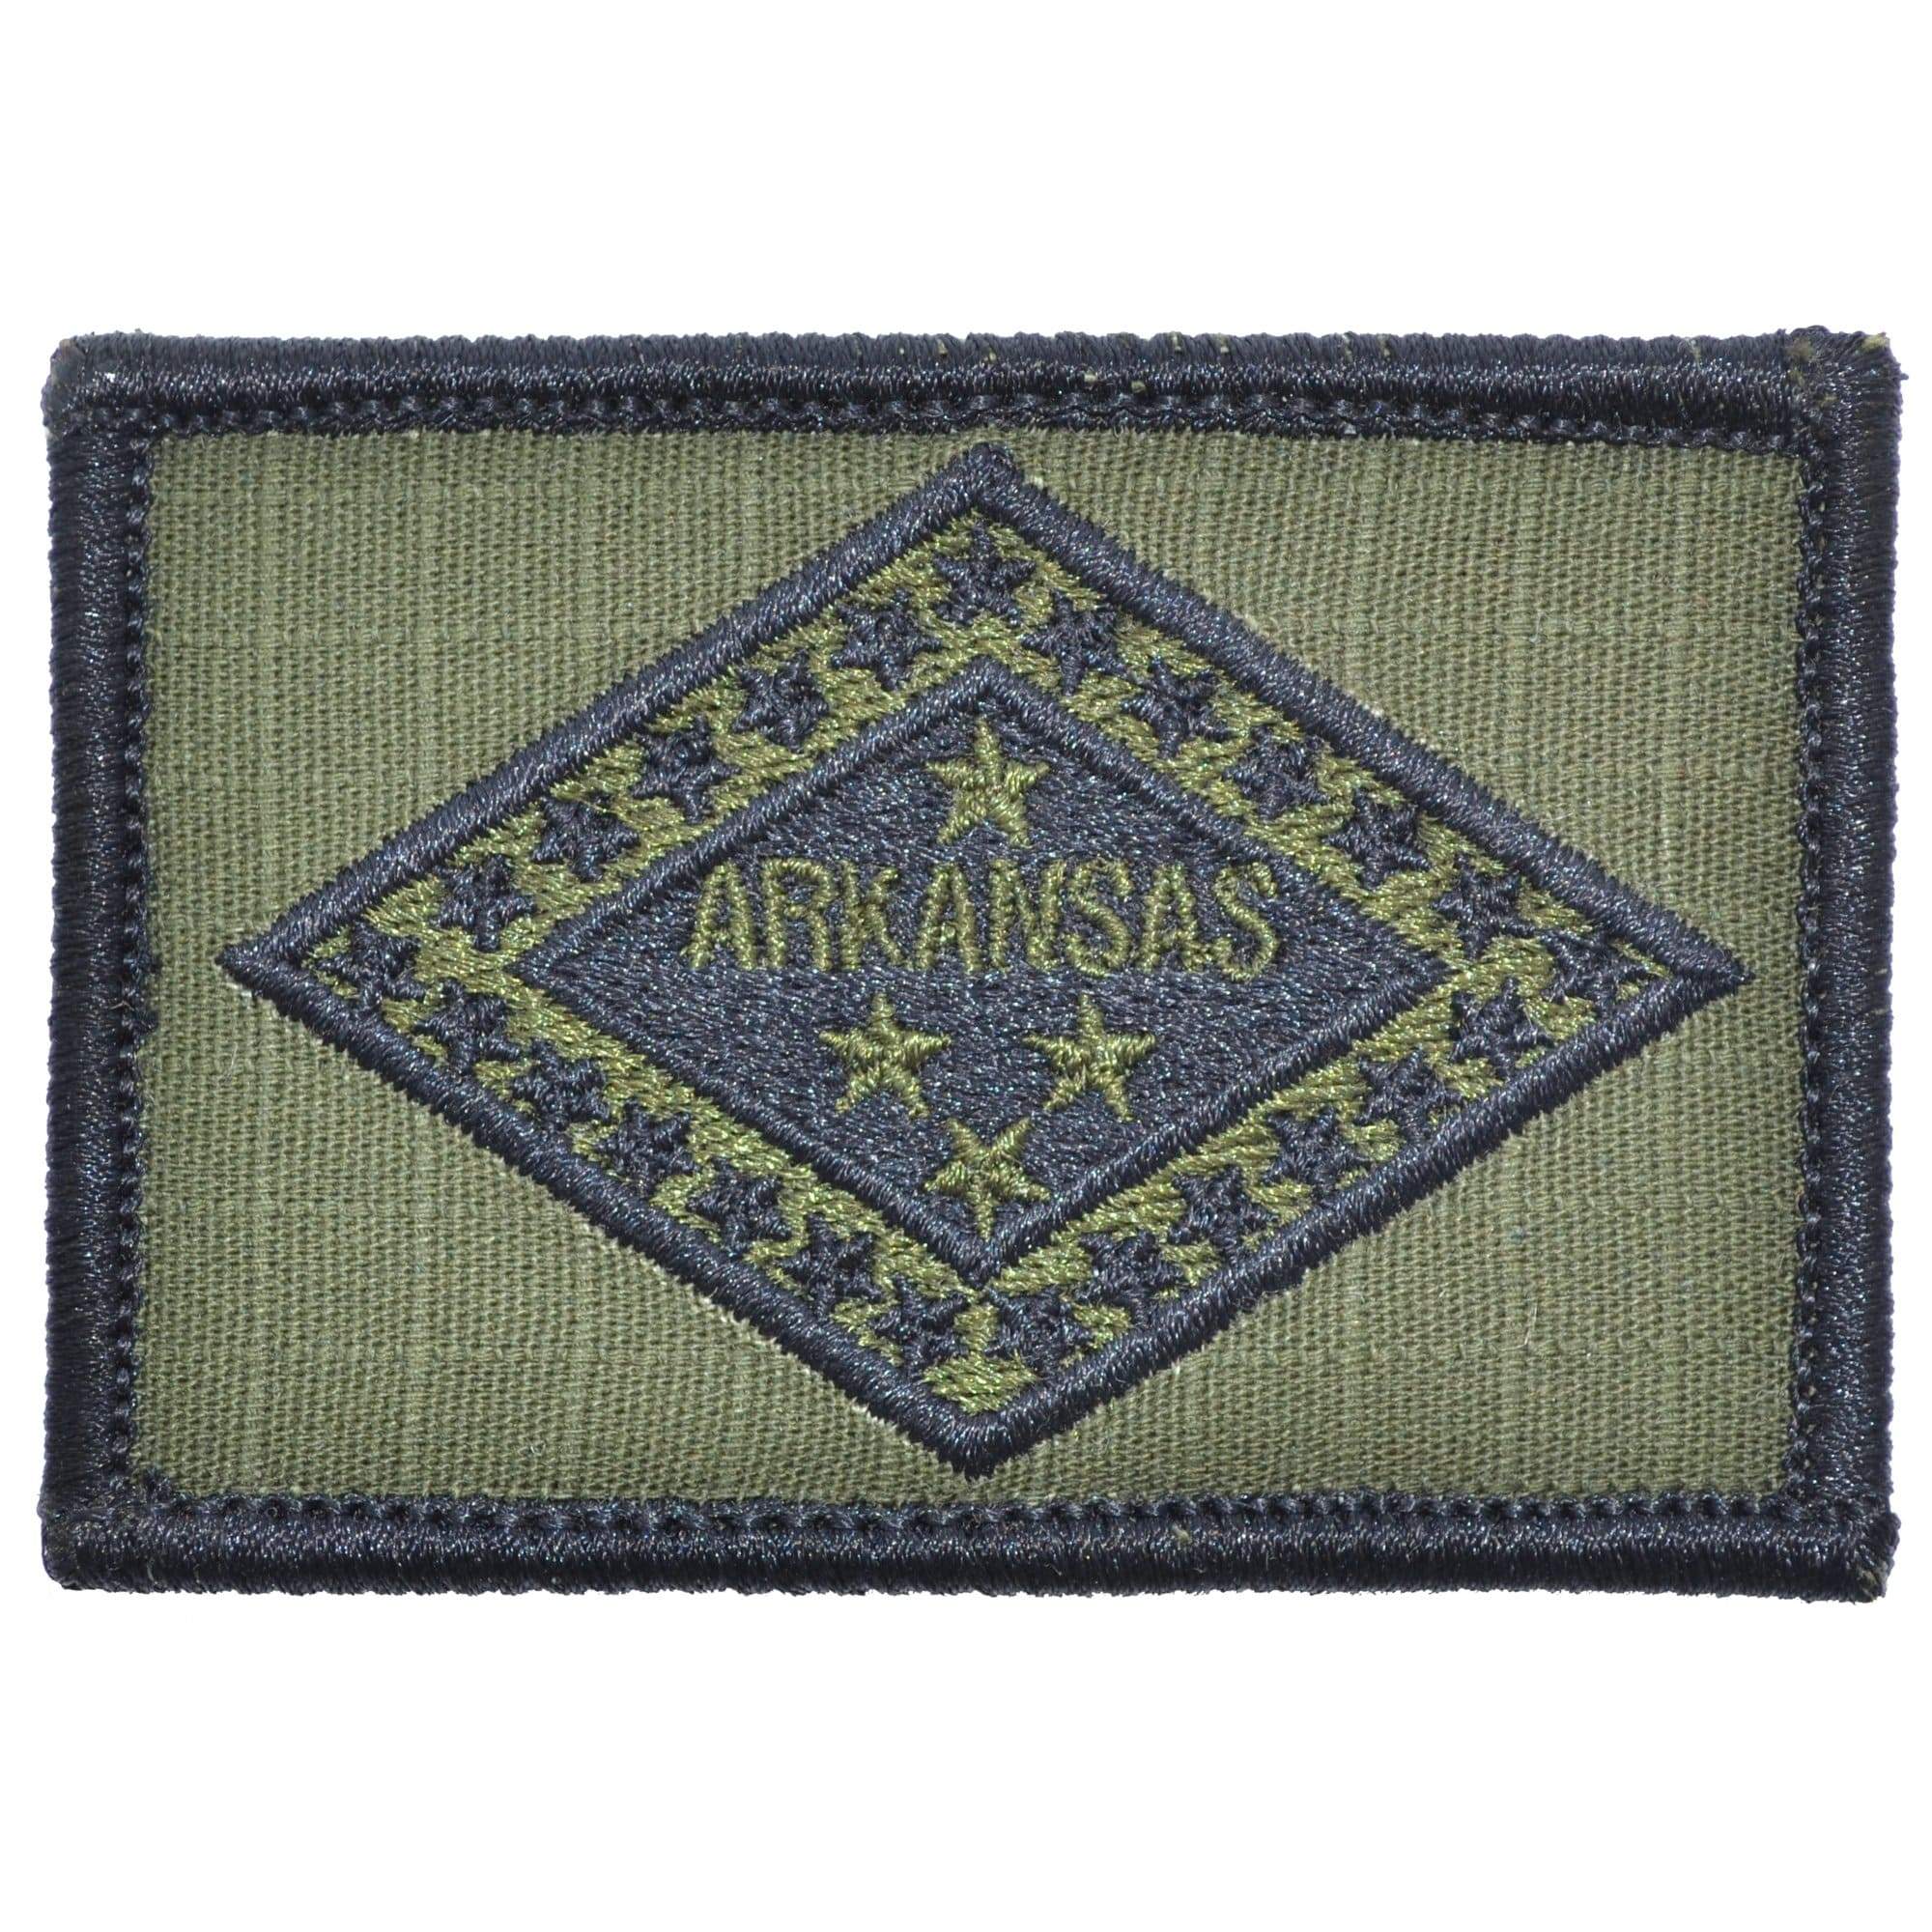 USAF 2 x 3 Inch OD Green Hook and Loop Patch